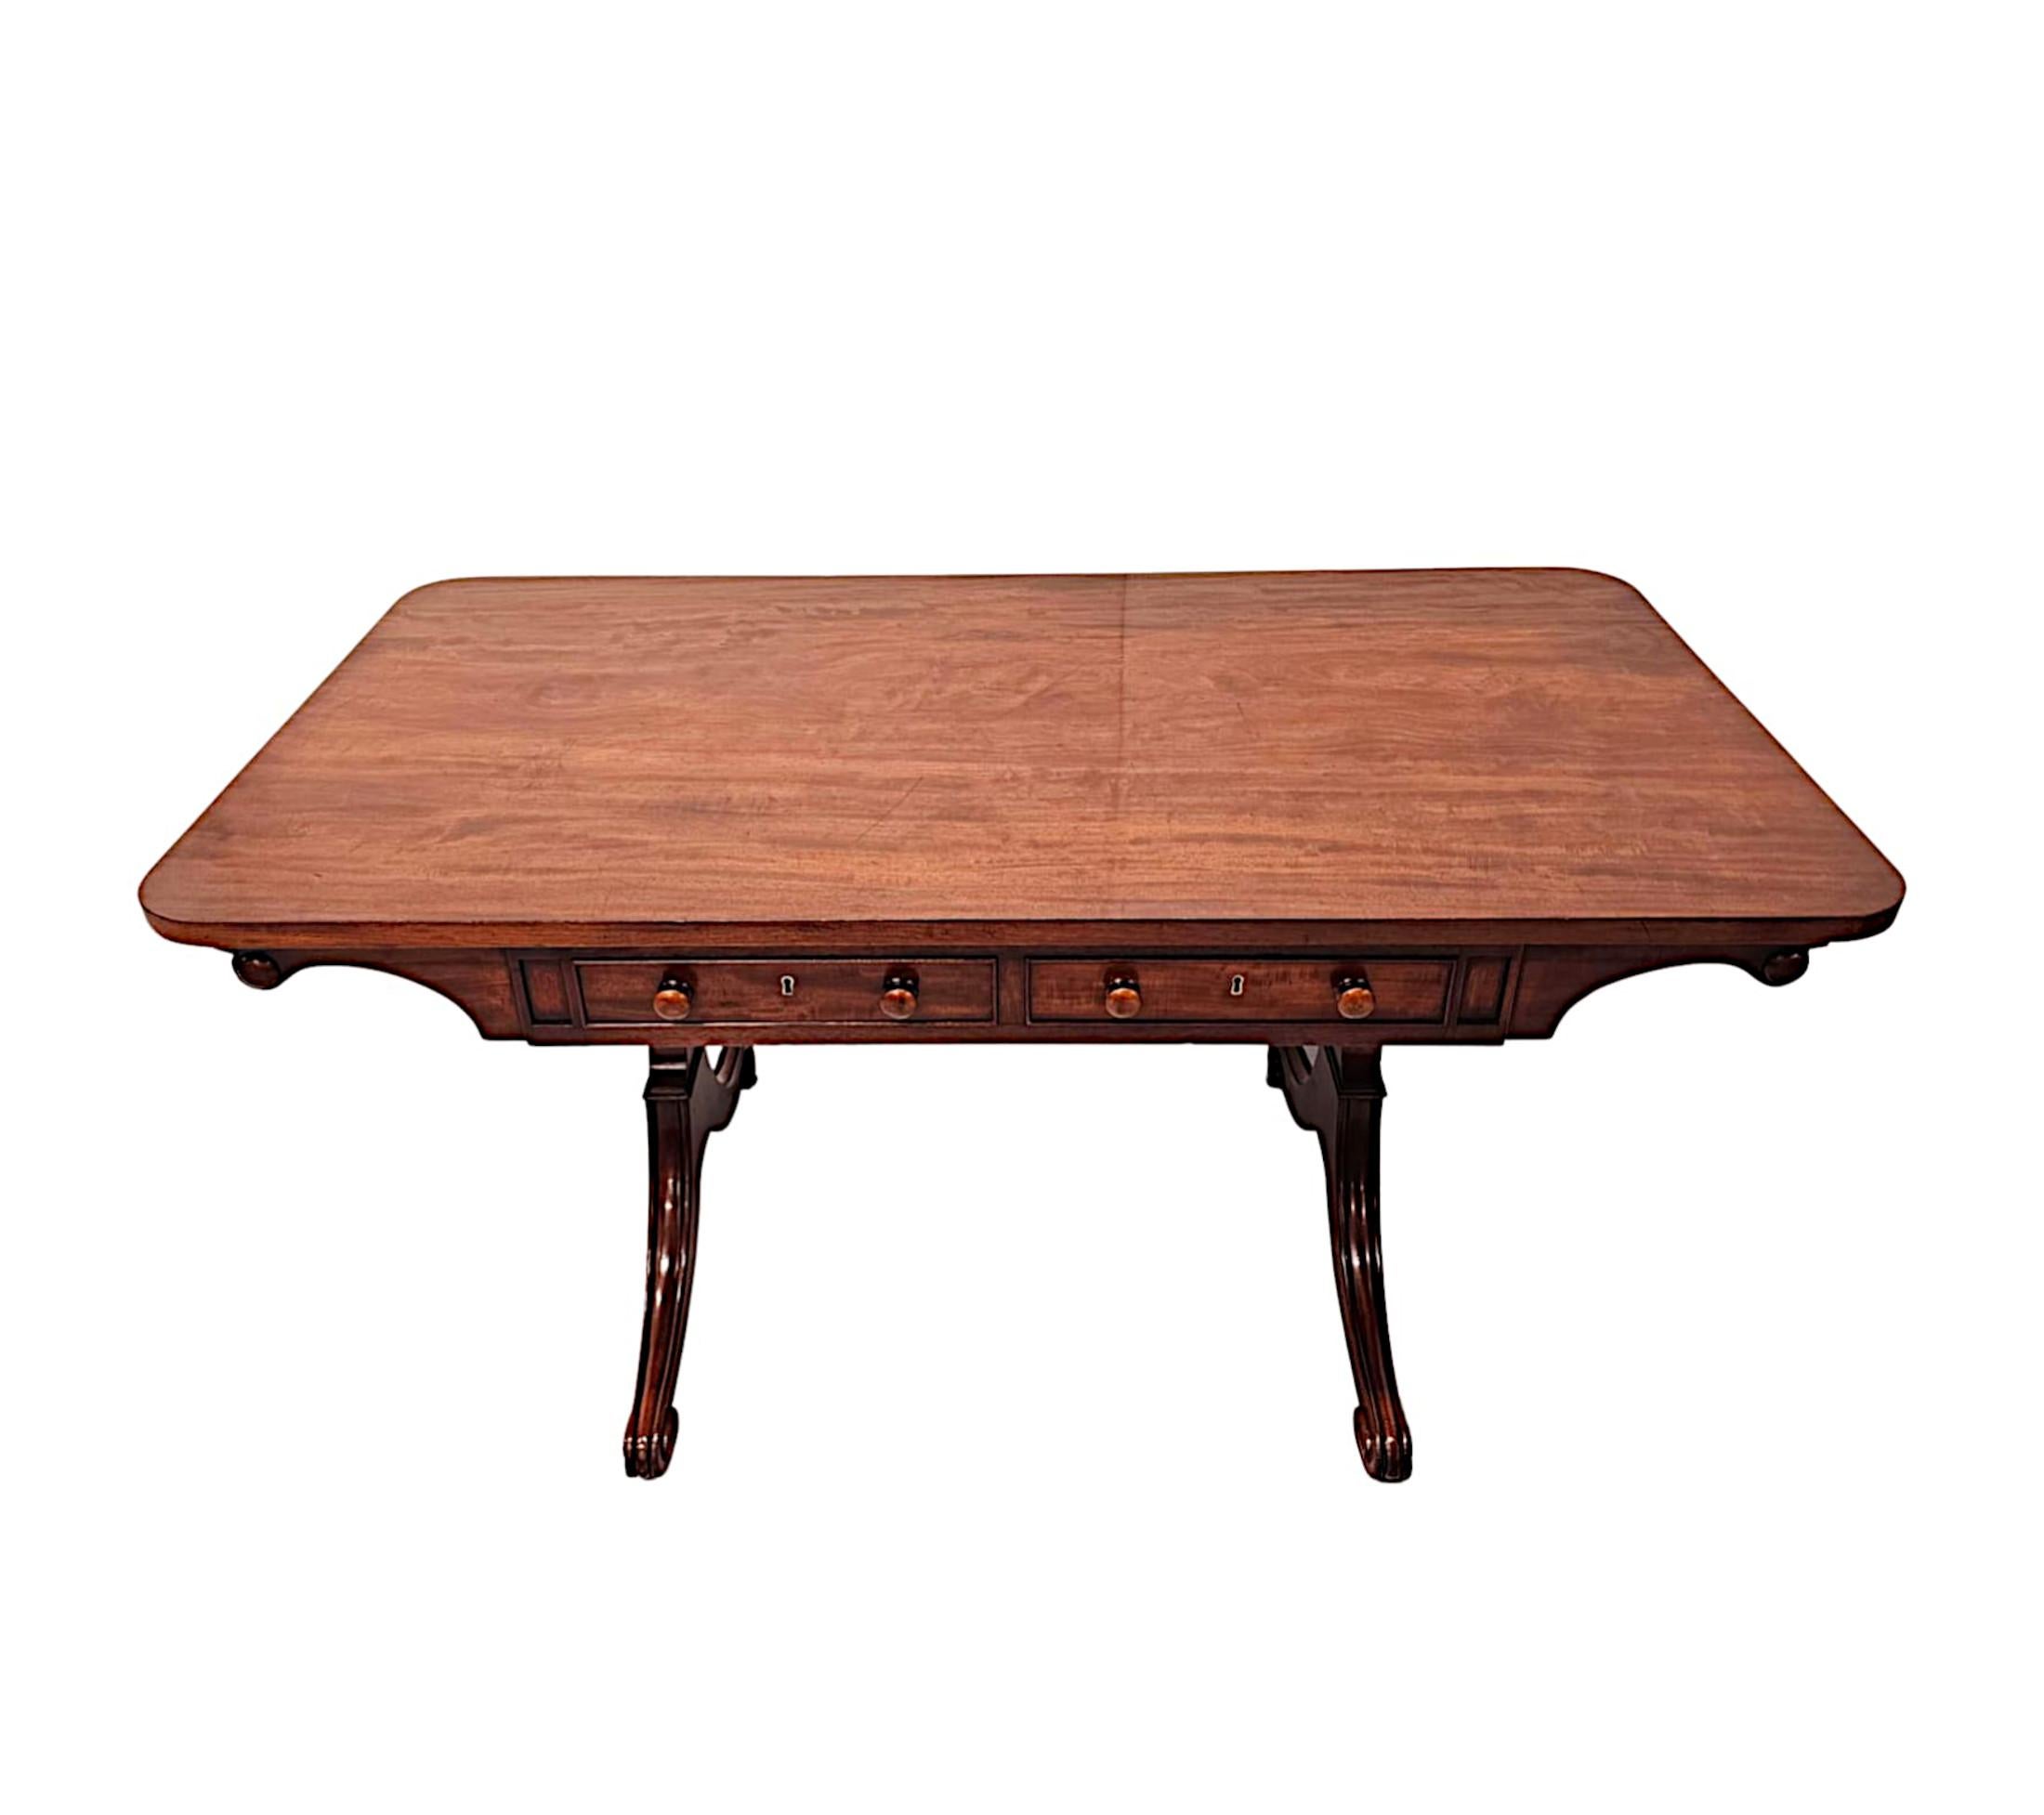 A very fine 19th Century Irish solid mahogany library table with a Strahan storage label and drawers numbered but attributed to 'Gillingtons of Dublin', of exceptional quality and finely hand carved with gorgeously rich patination.  The well